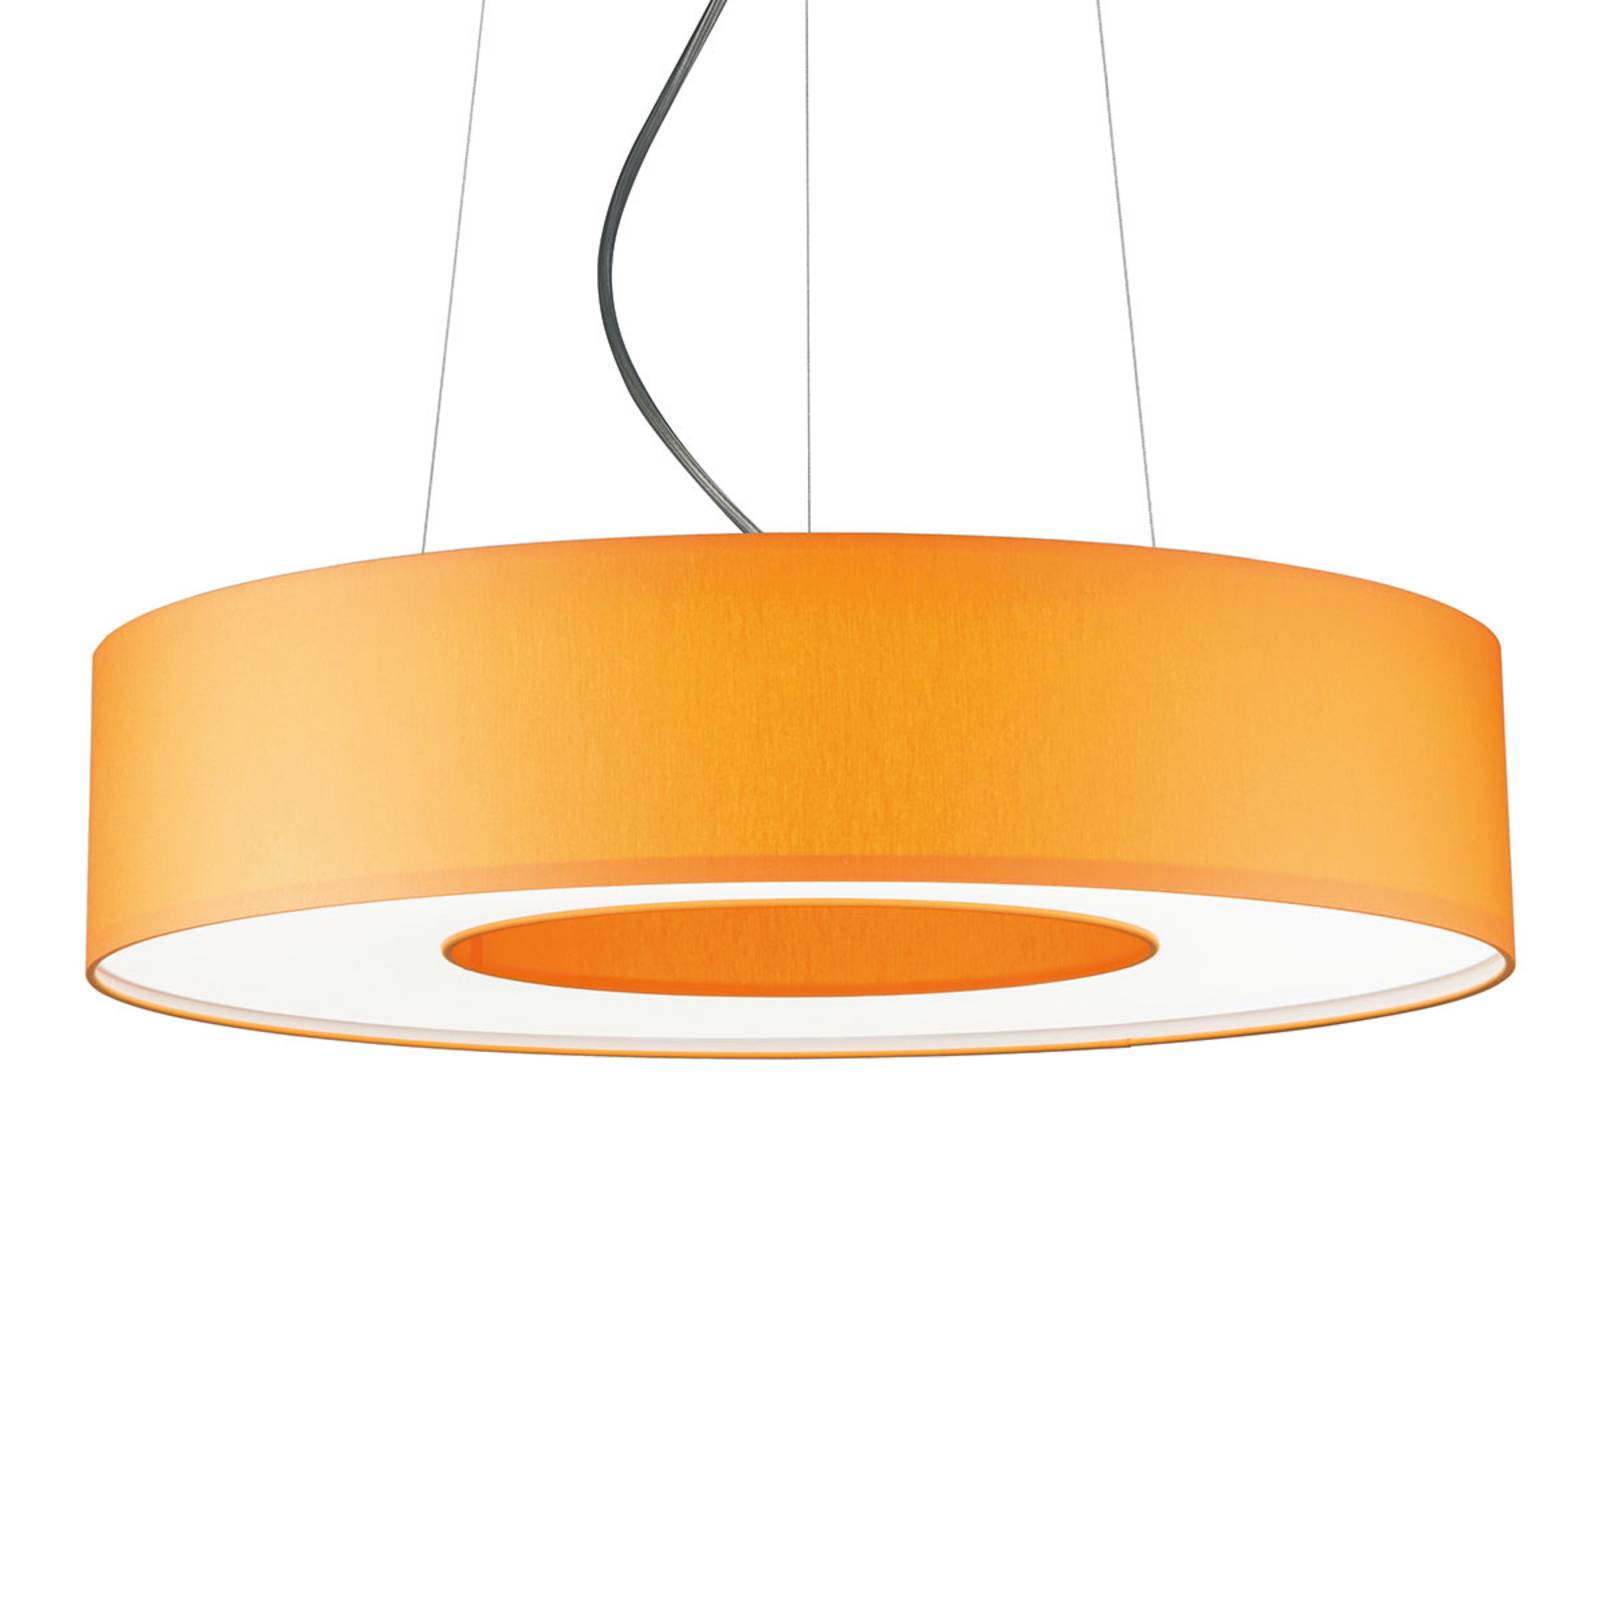 Suspension LED Donut dimmable 22 W orange